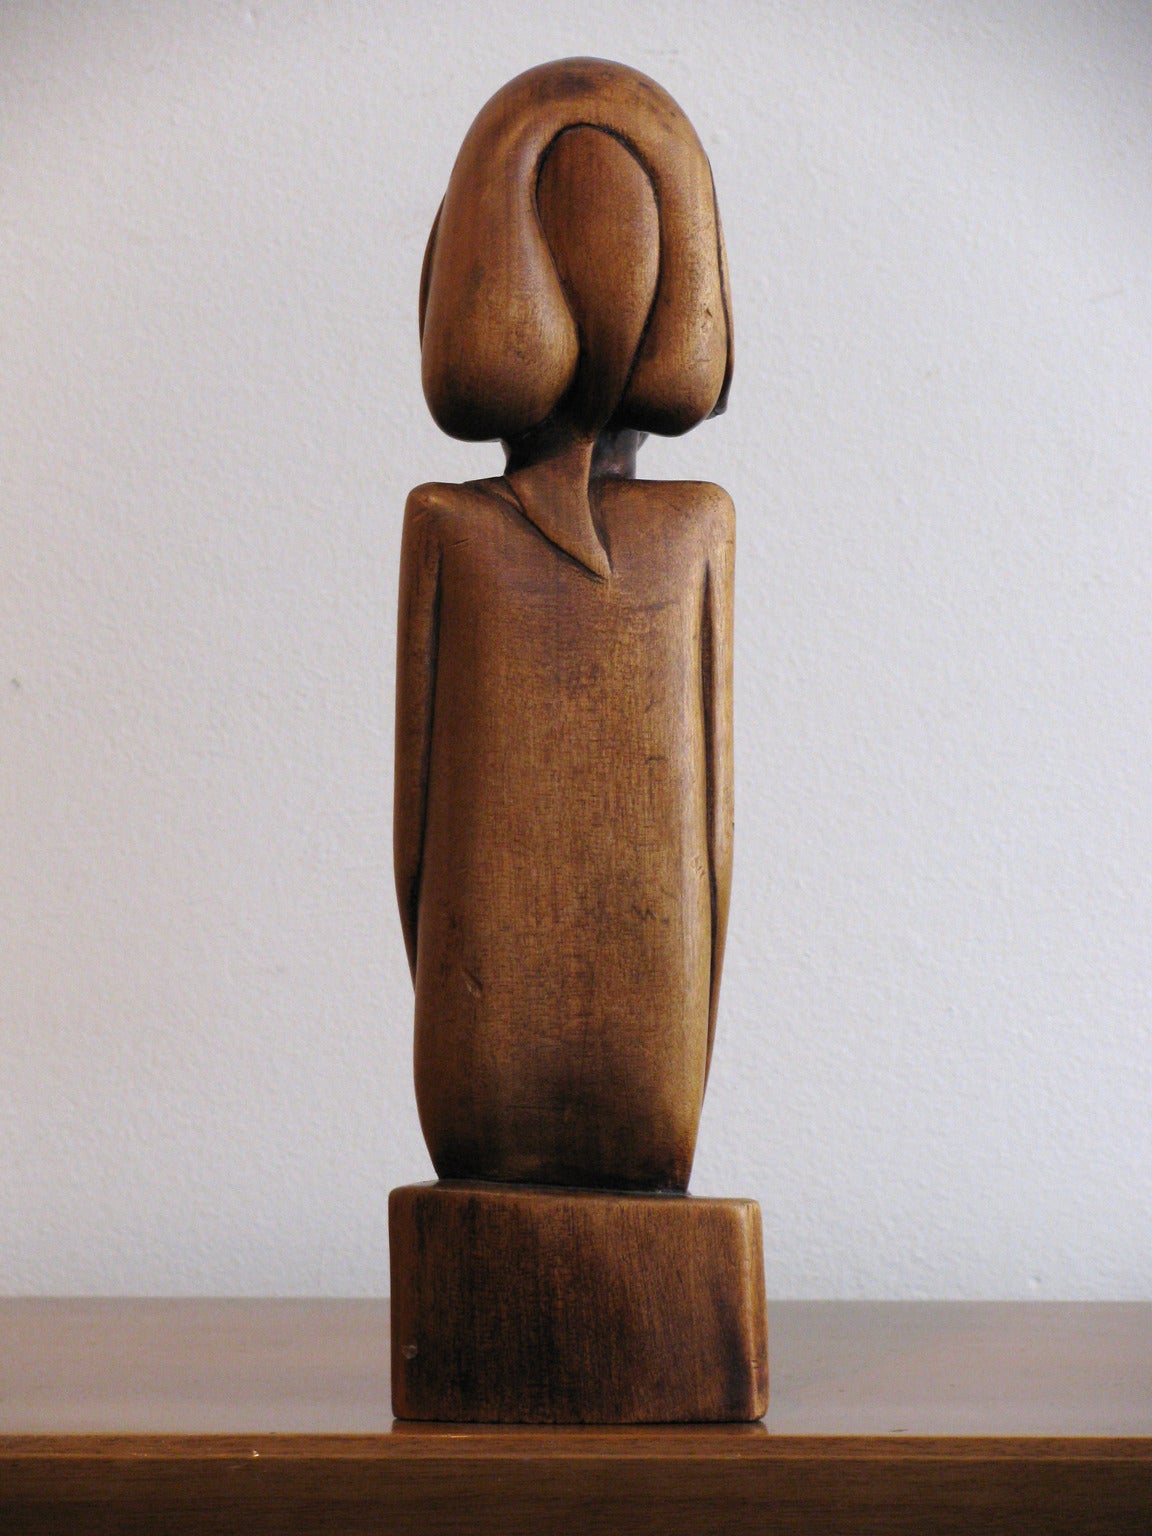 Balinese Art Deco Sculpture, circa 1935 In Excellent Condition For Sale In Amsterdam, NL